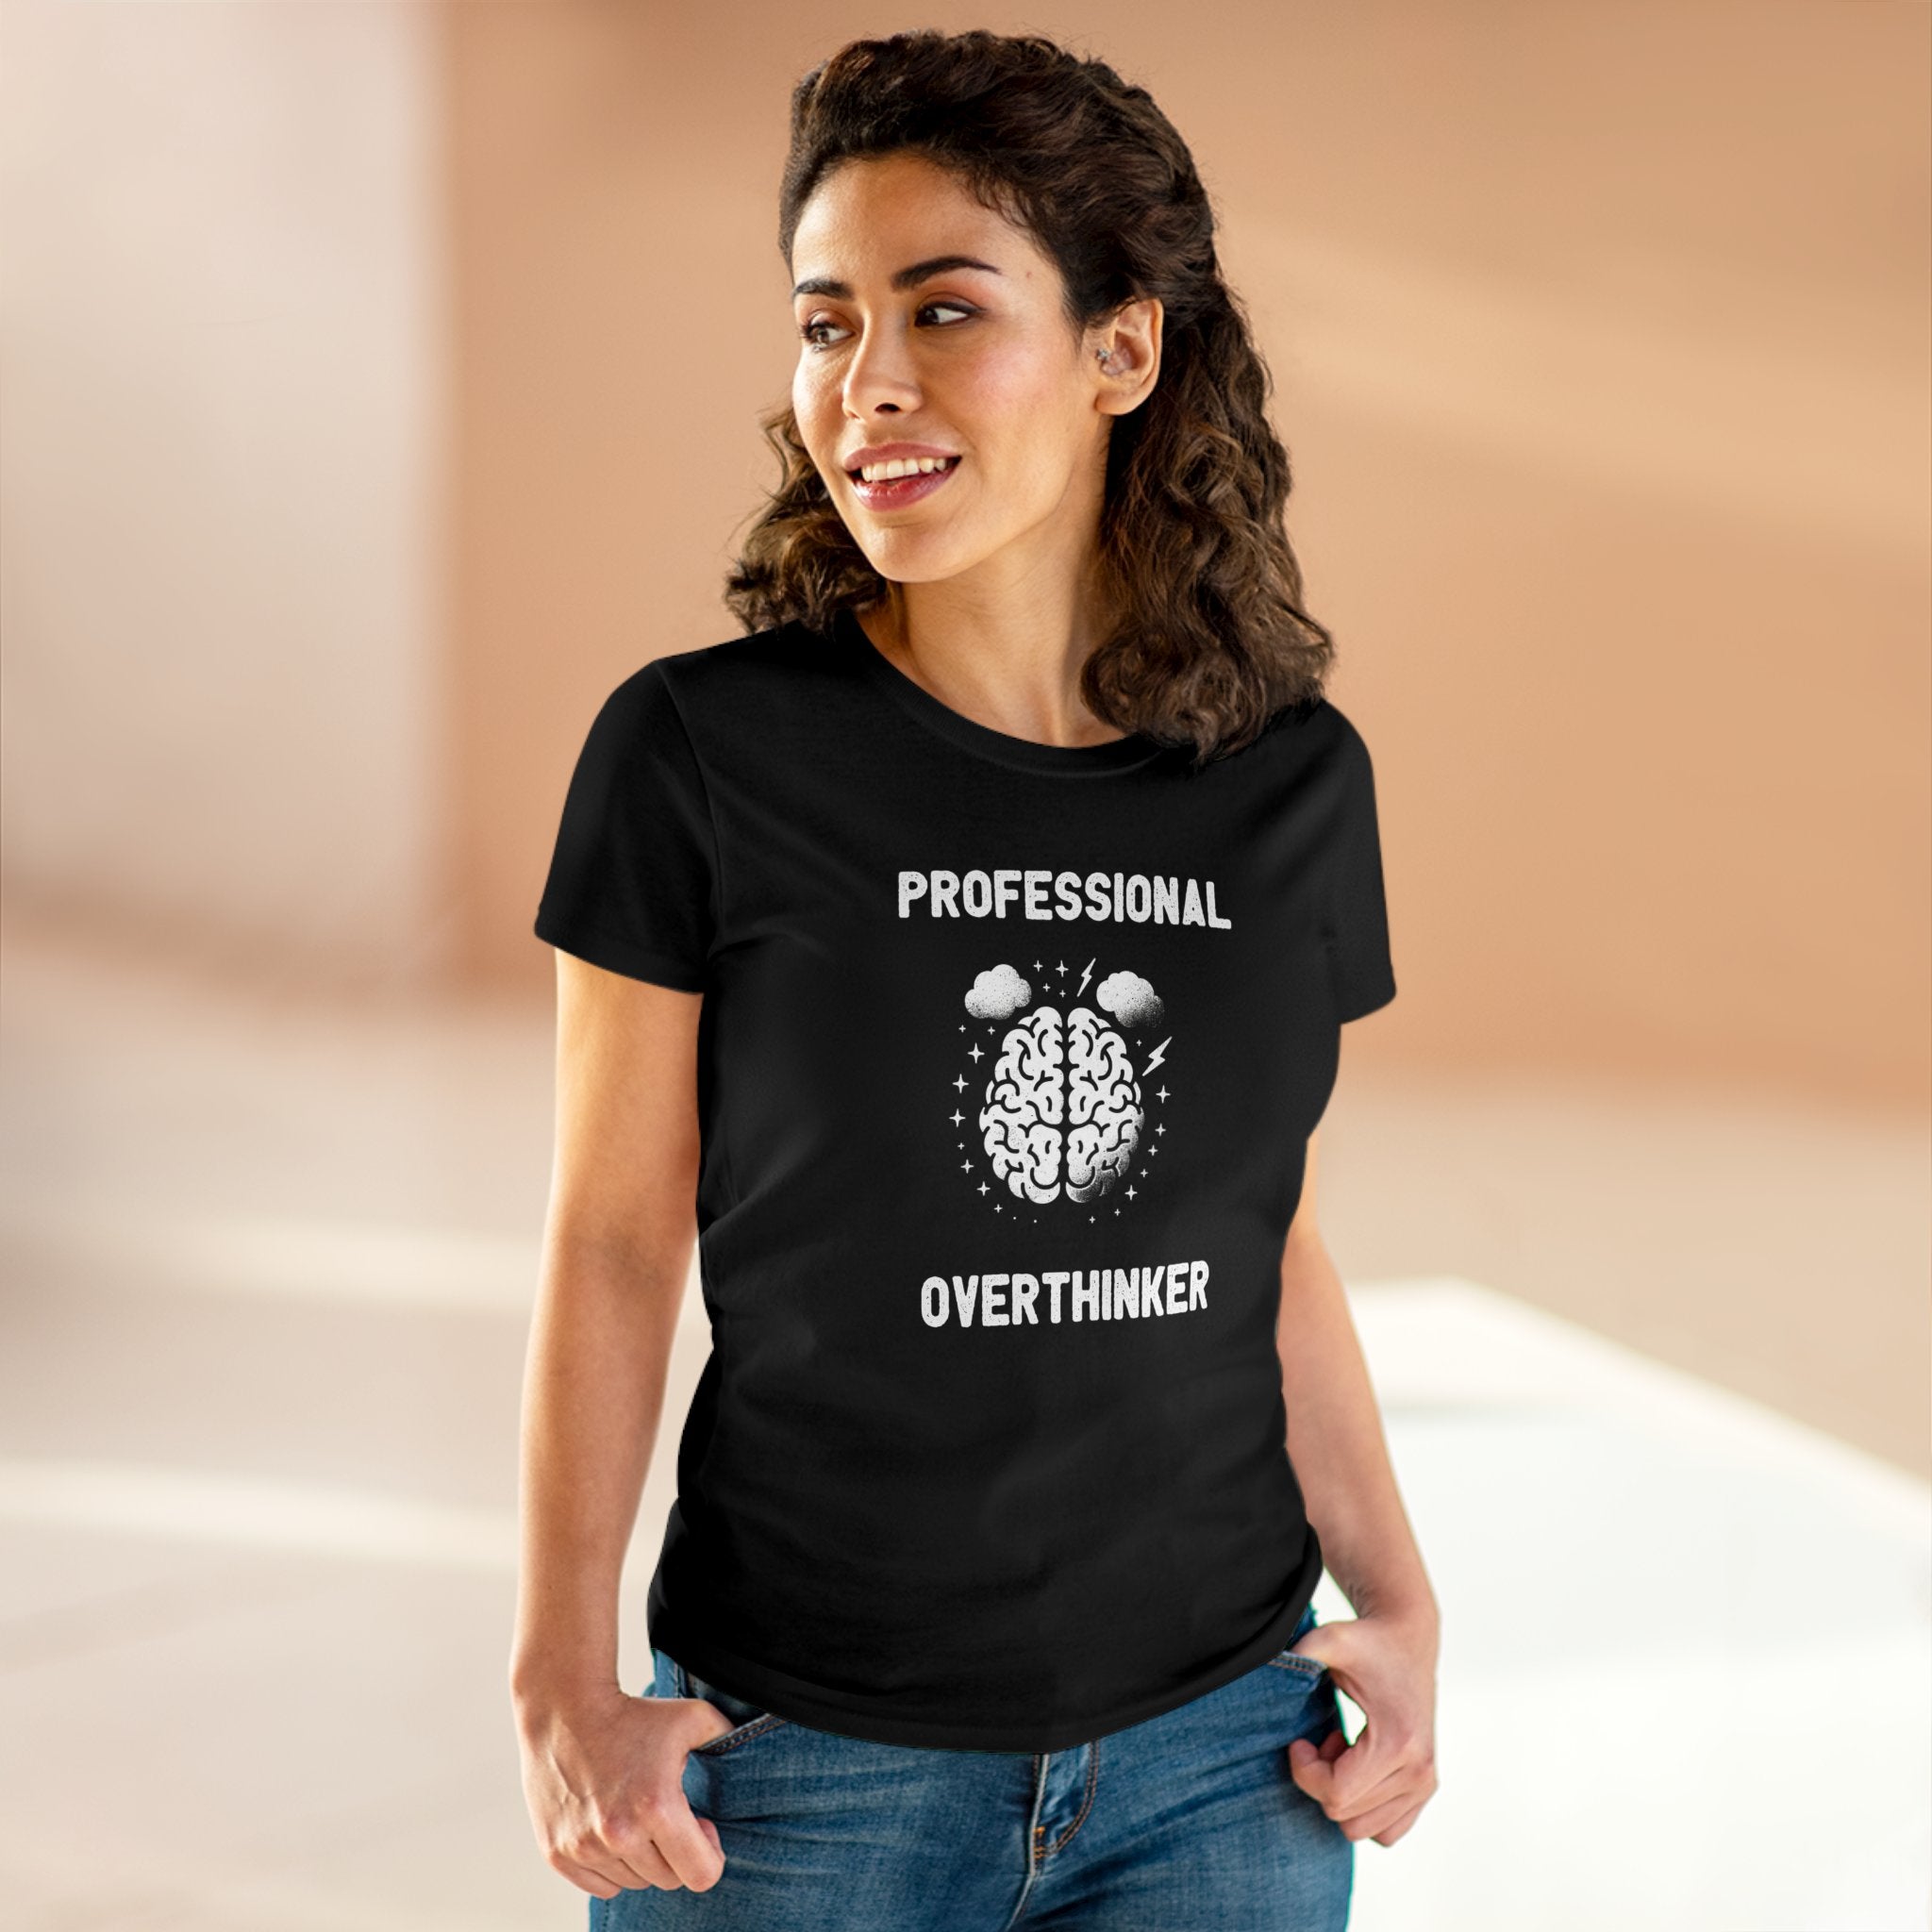 A woman wearing a black Professional Overthinker - Women's Tee with the text "Professional Overthinker" and an image of a brain printed on it, standing indoors and smiling. The semi-fitted, pre-shrunk comfort adds to her confident demeanor.